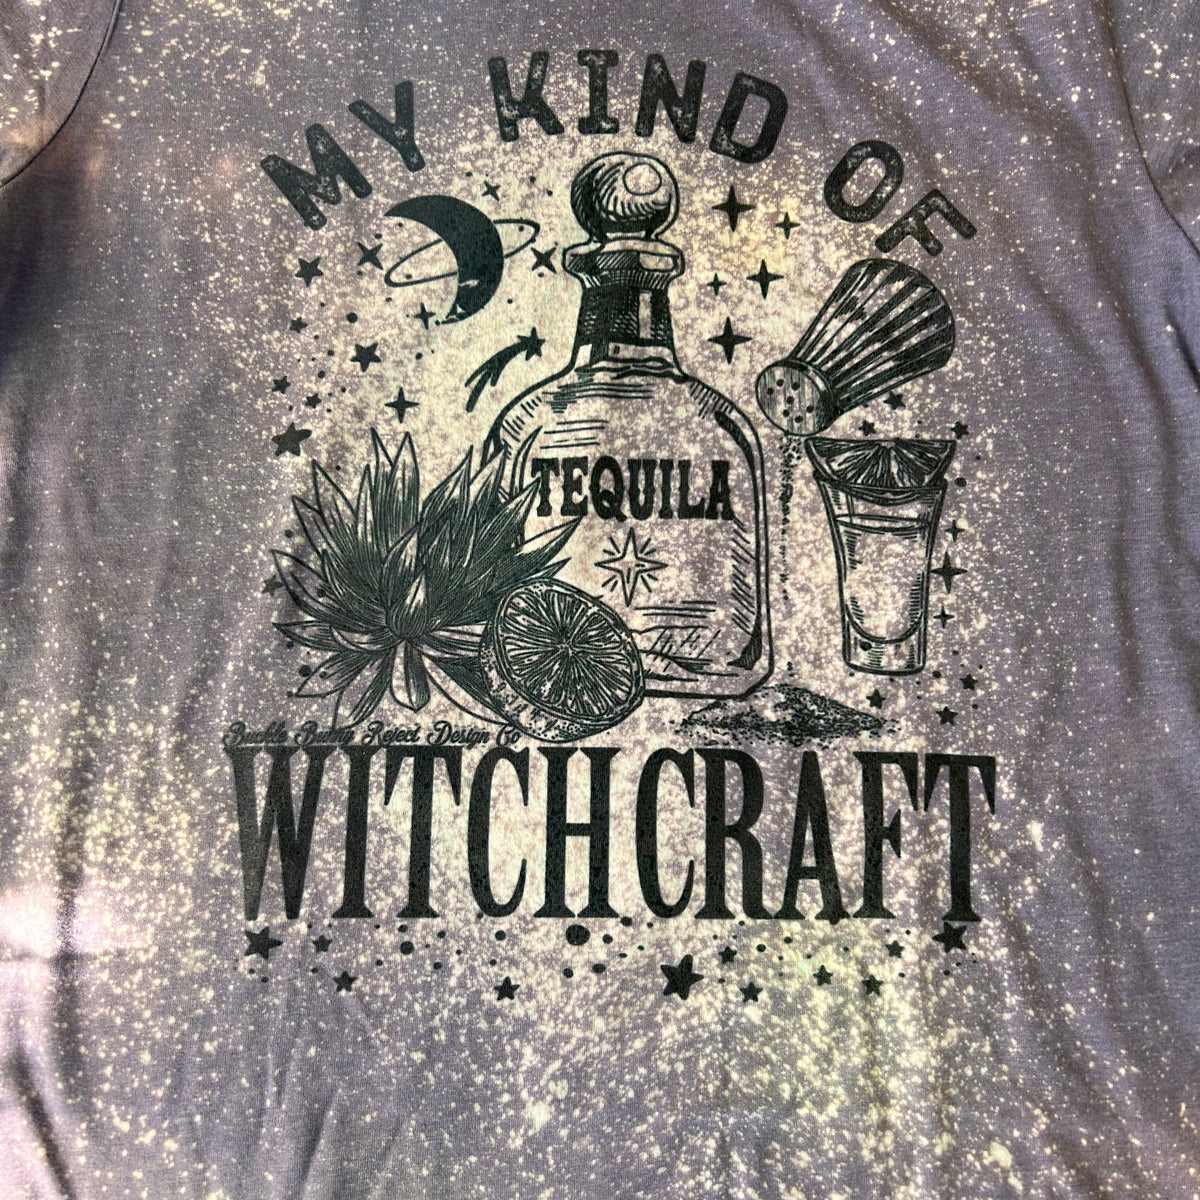 My kind of witchcraft tee (M, L, 2XL)